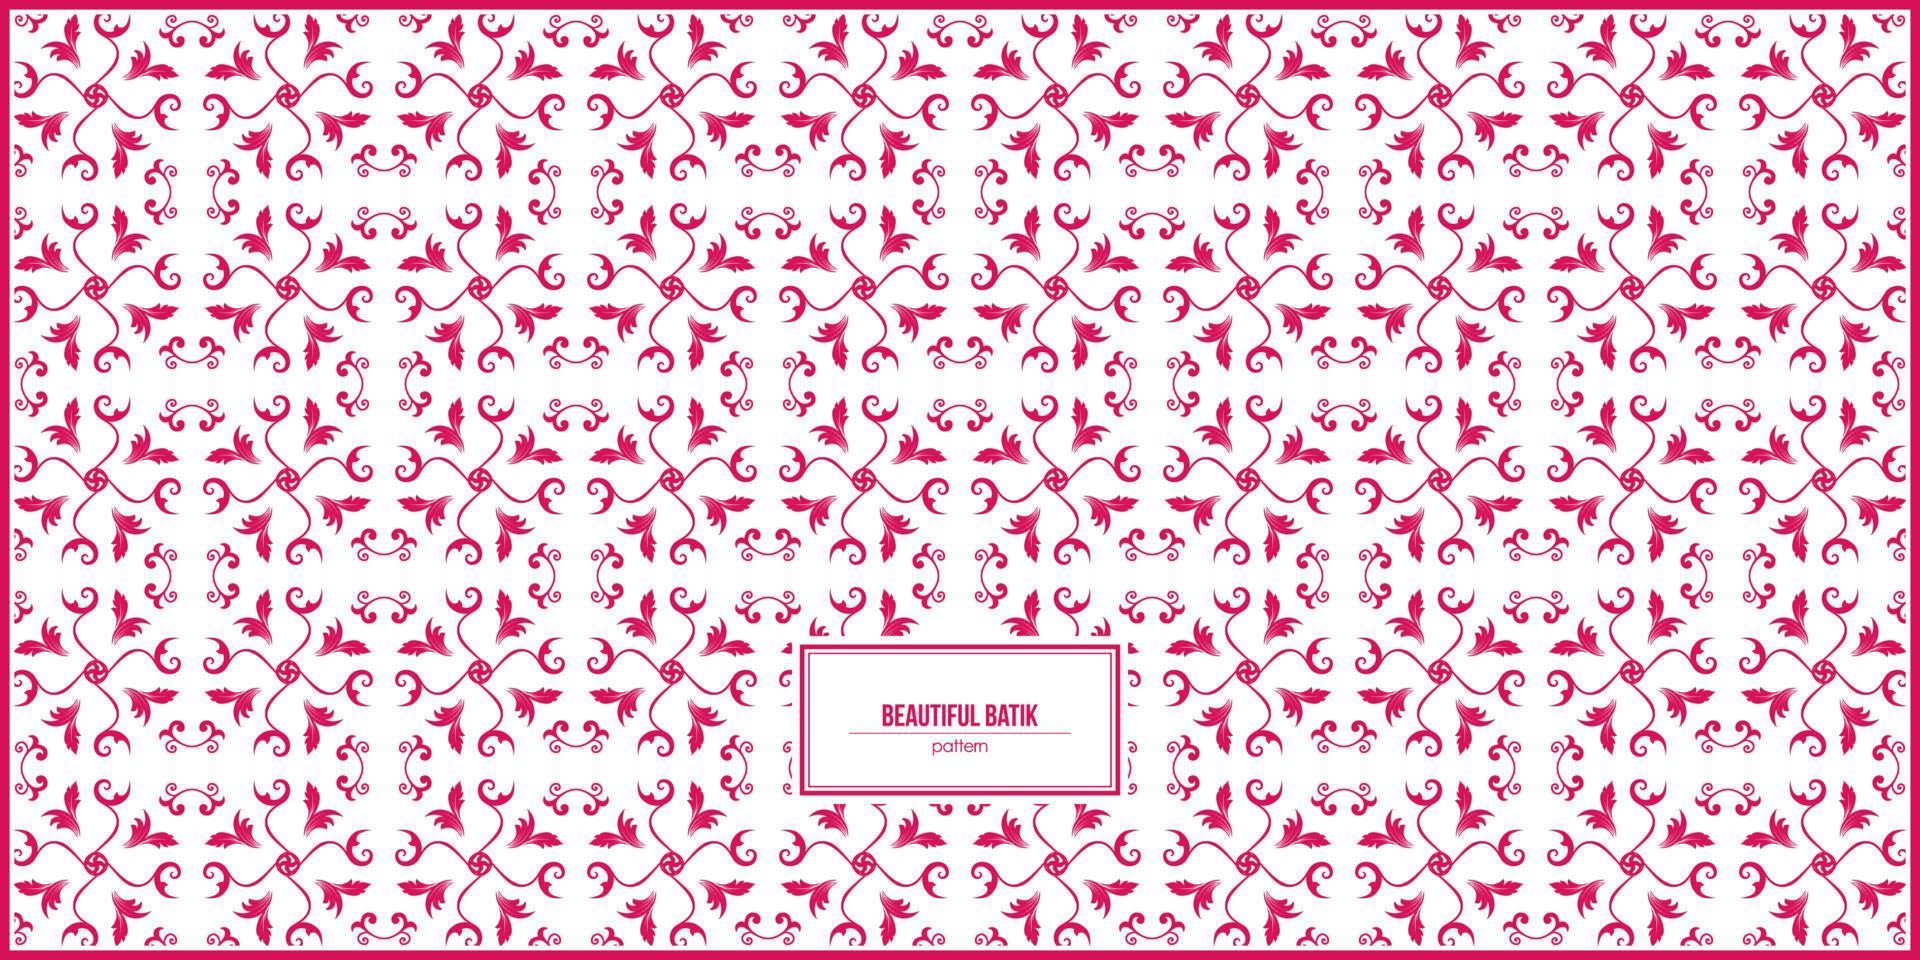 beautiful pink batik pattern with multiple floral ornaments vector